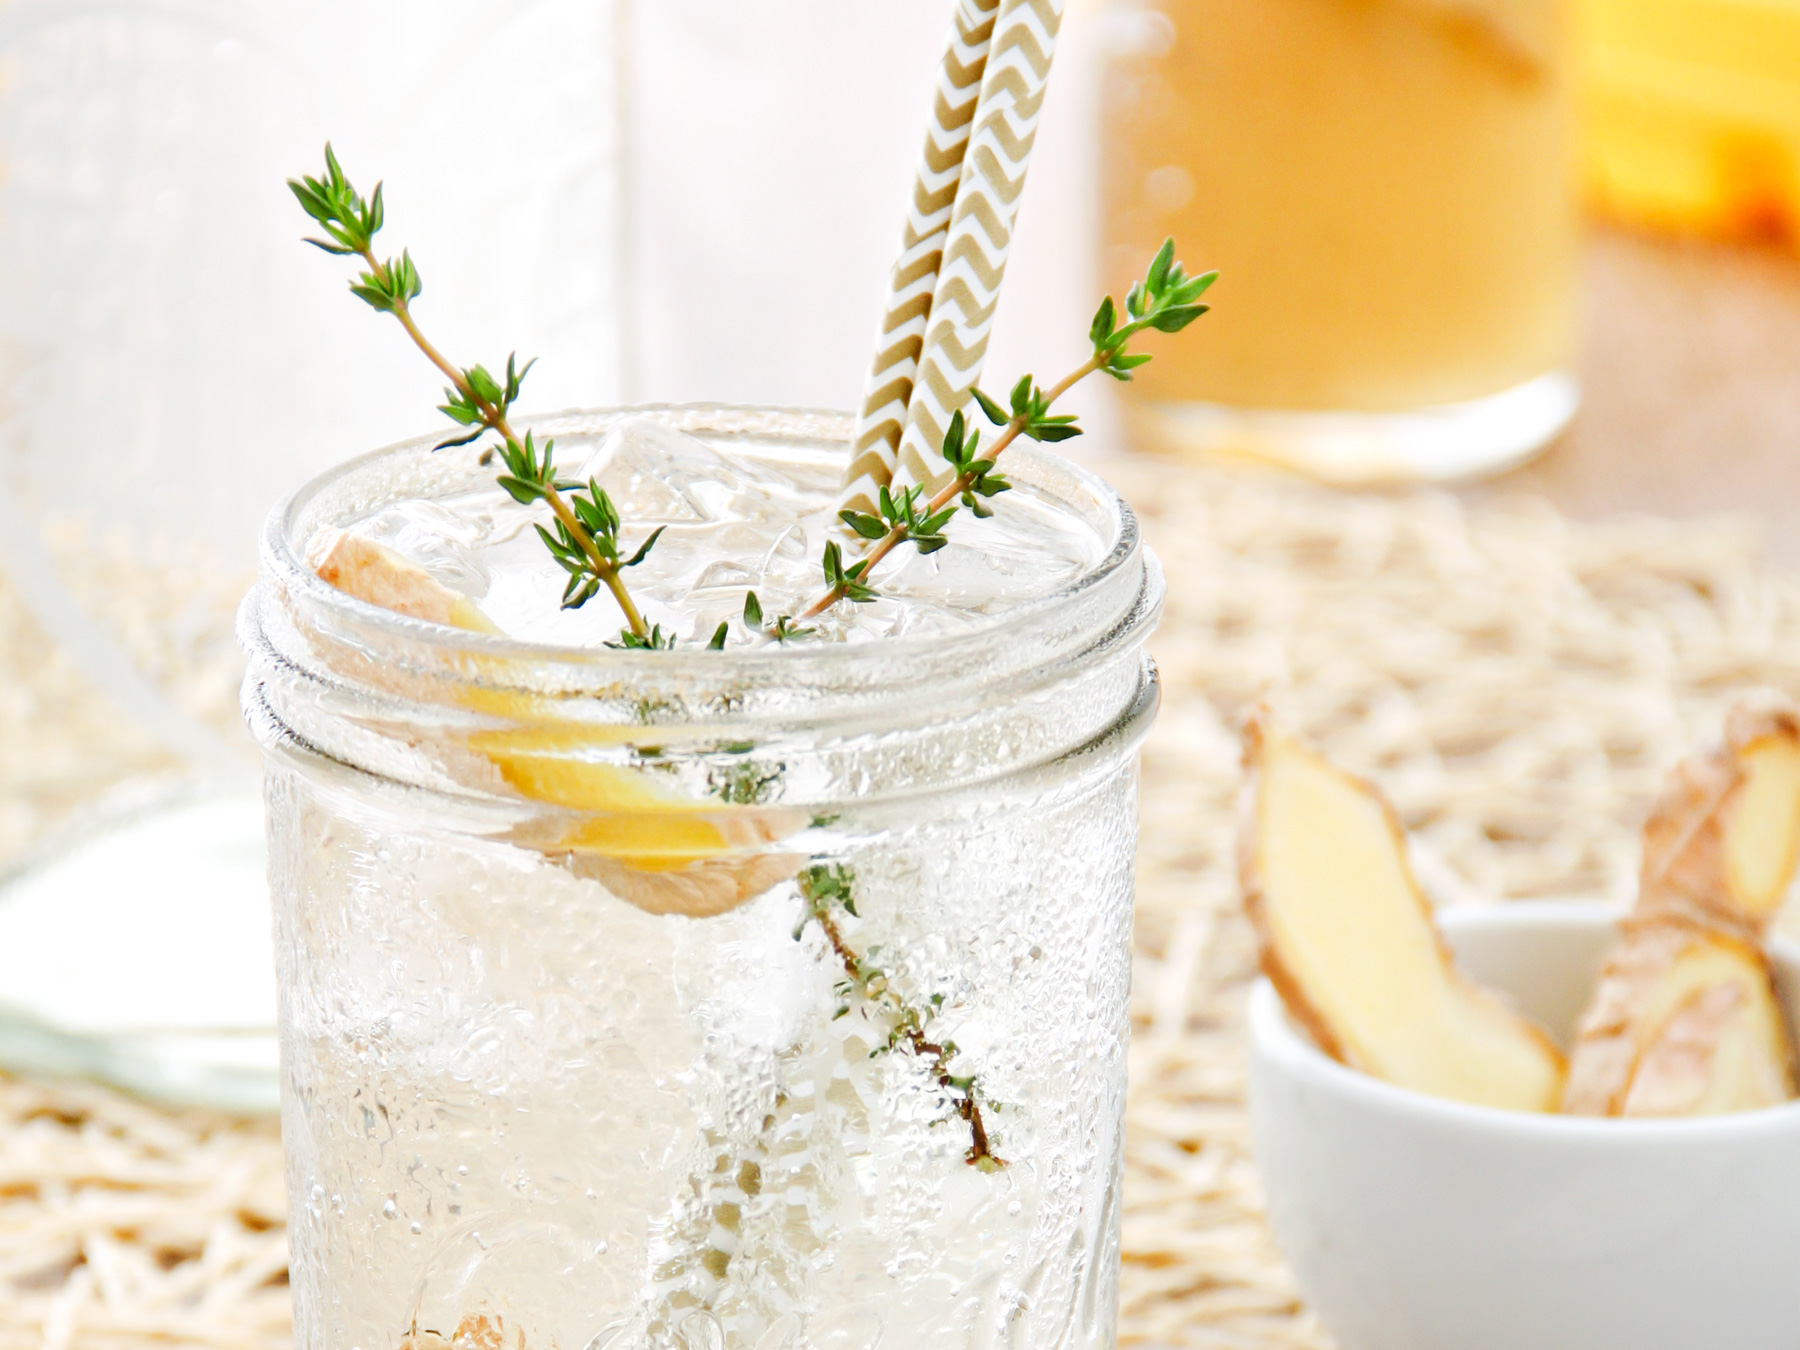 homemade ginger ale syrup recipe in Consol jar